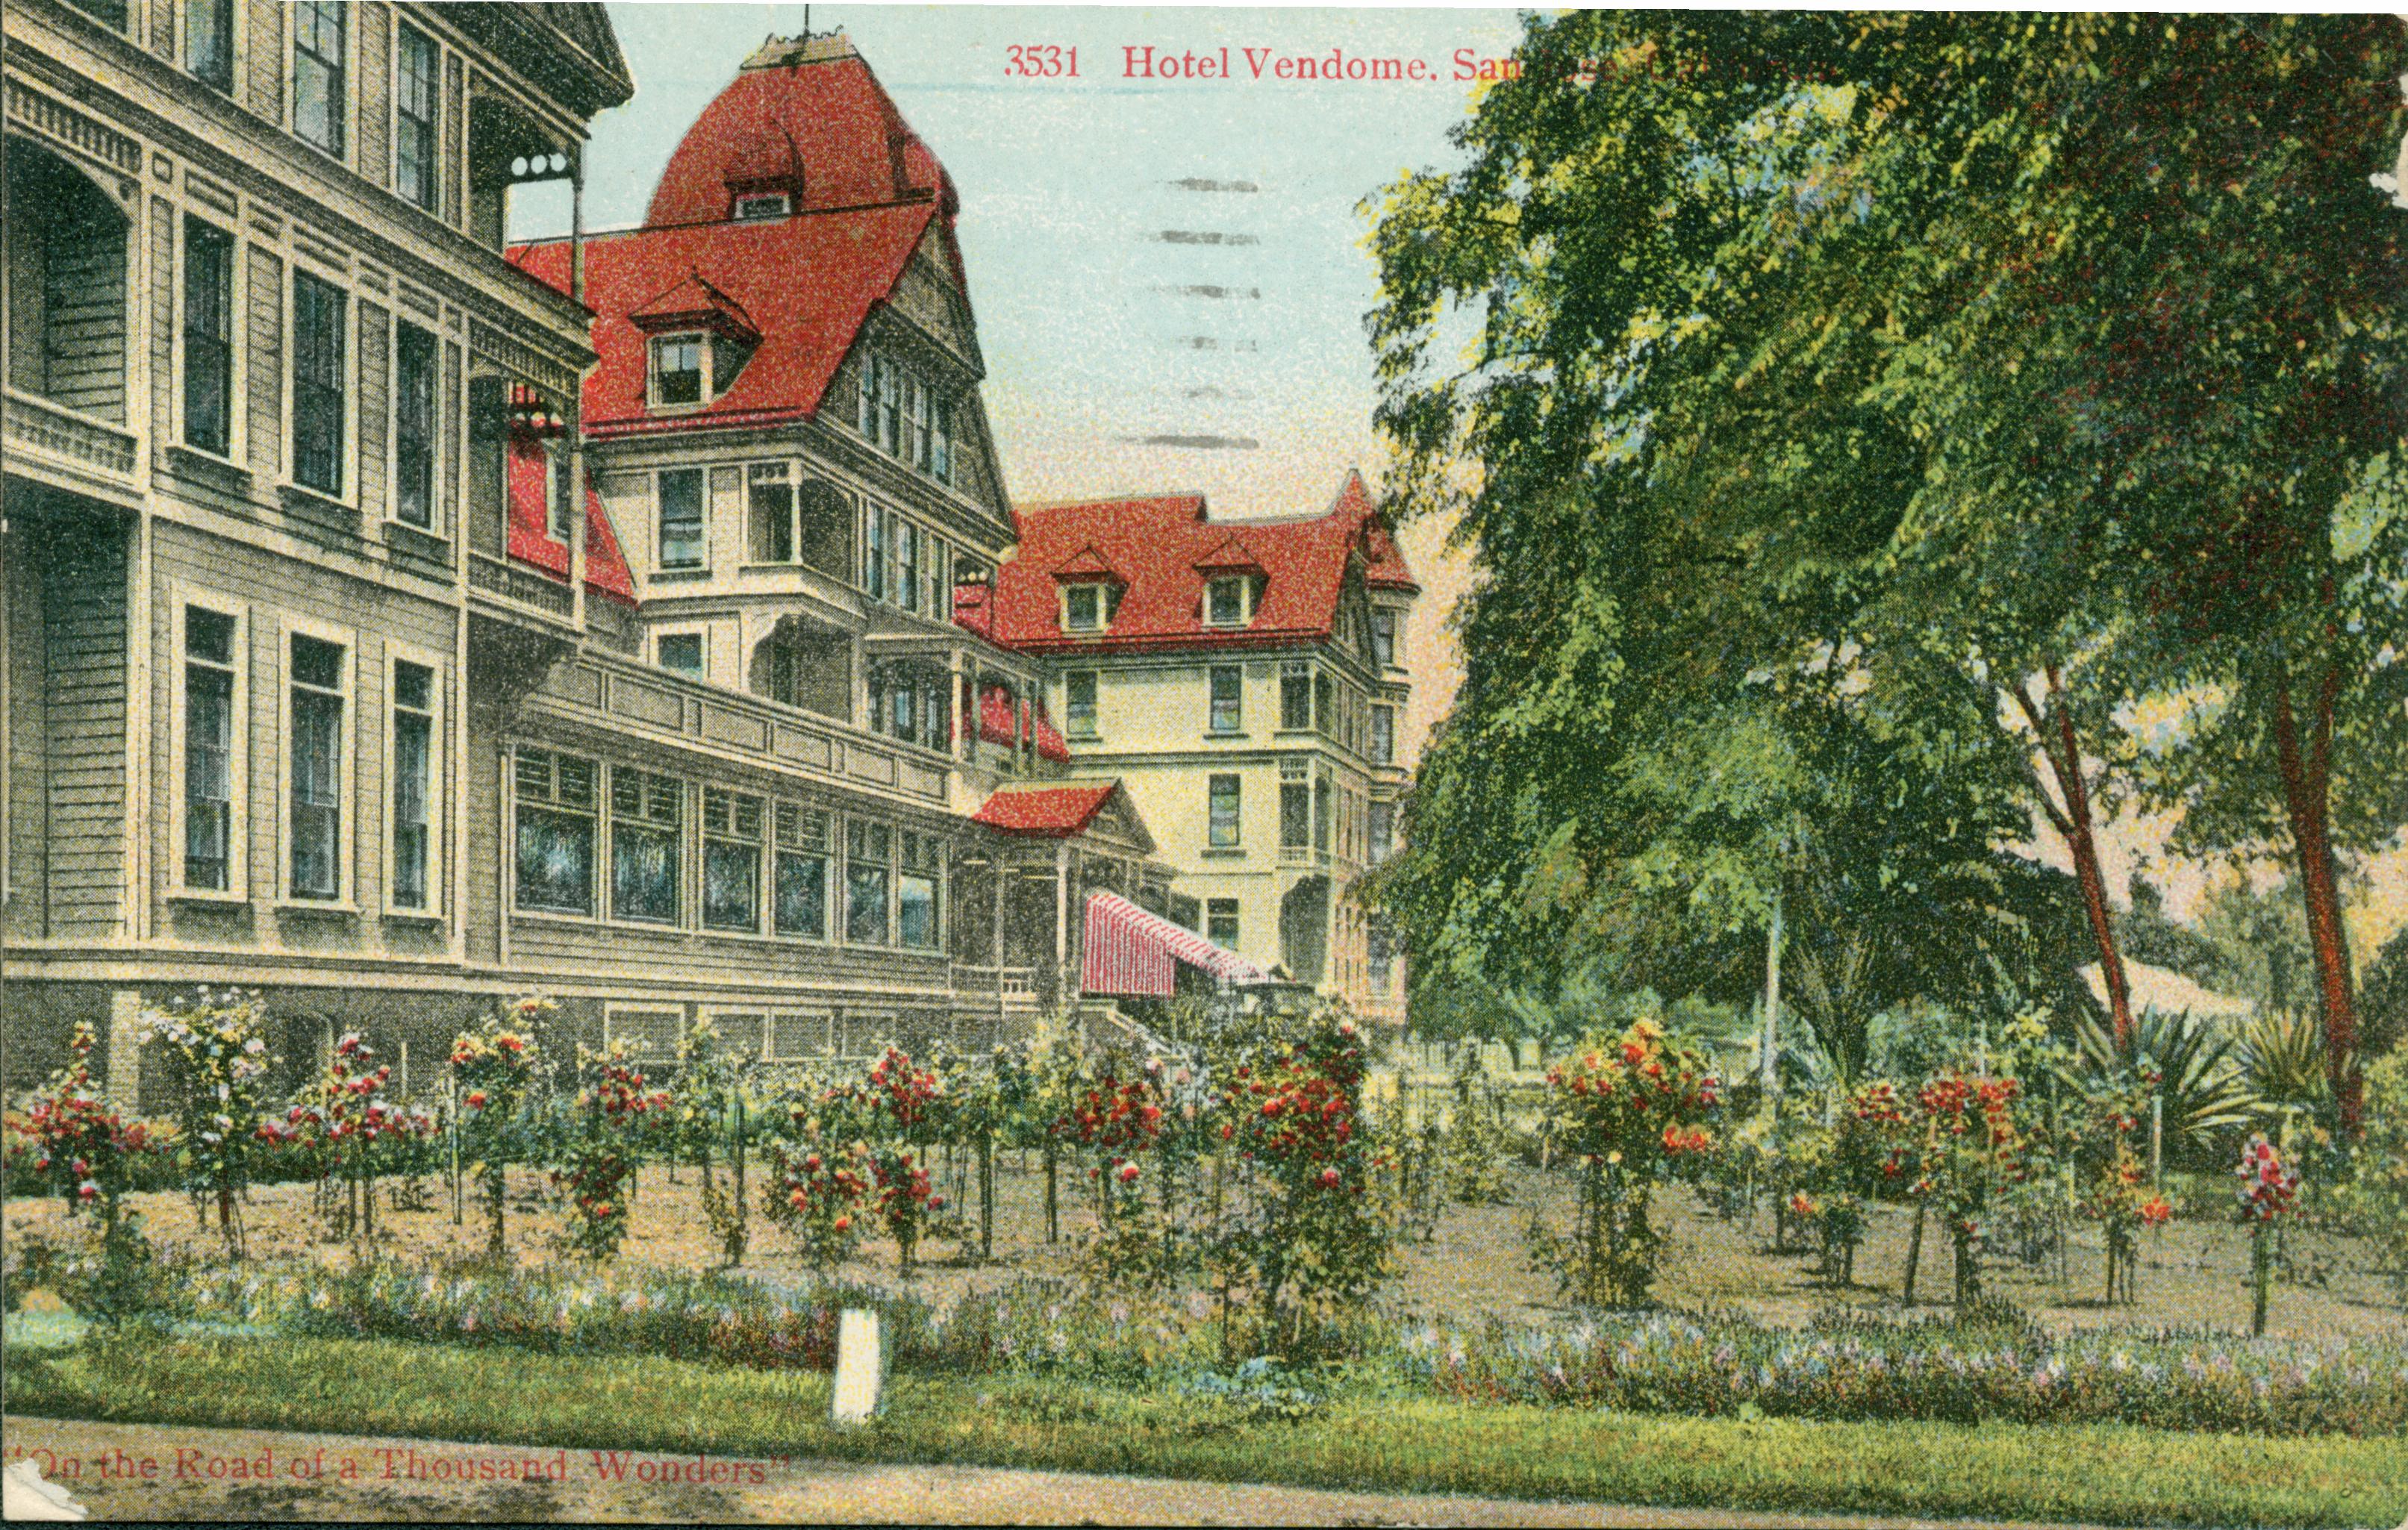 Colorful scene of the Hotel Vendome, road in front of hotel with gardens and trees